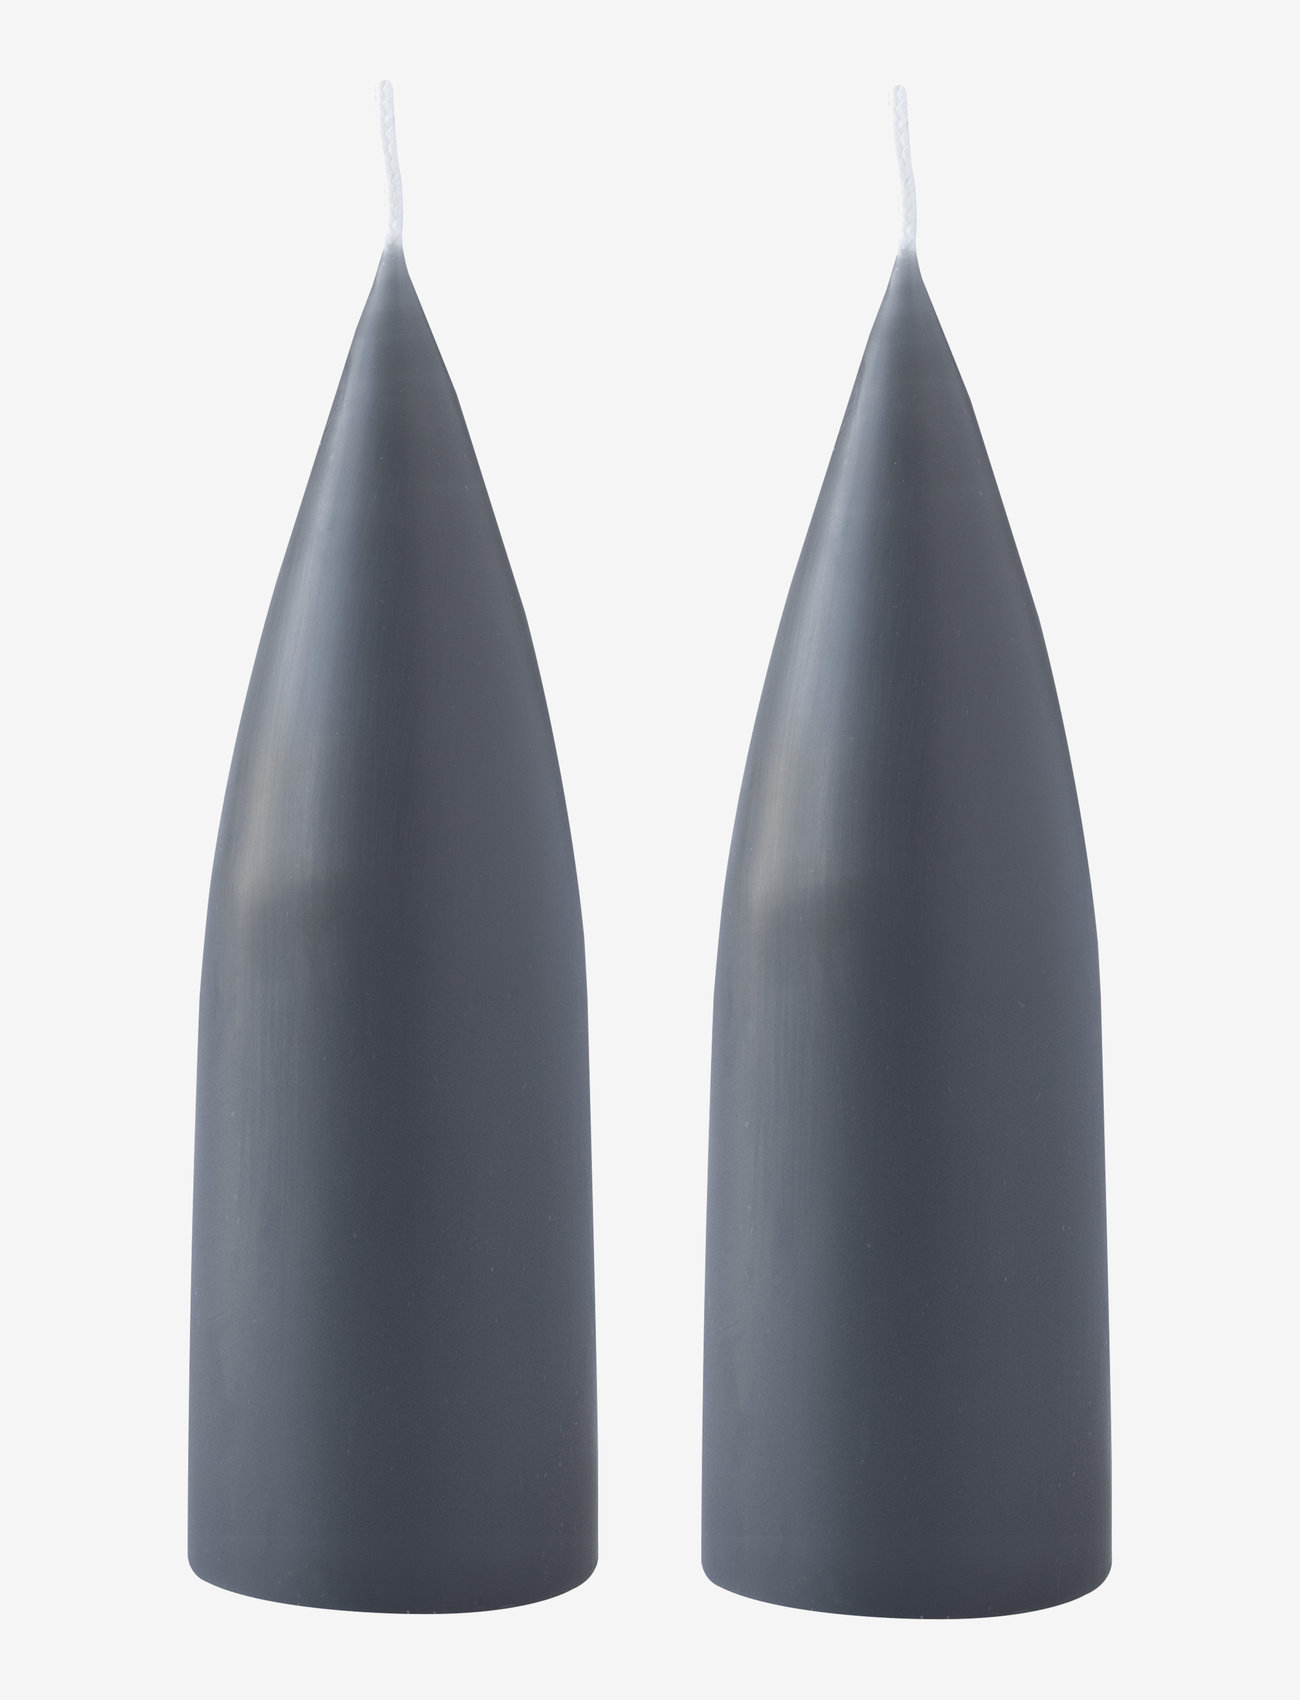 Kunstindustrien - Hand Dipped Cone-Shaped Candles, 2 pack - lowest prices - charcoal grey - 0